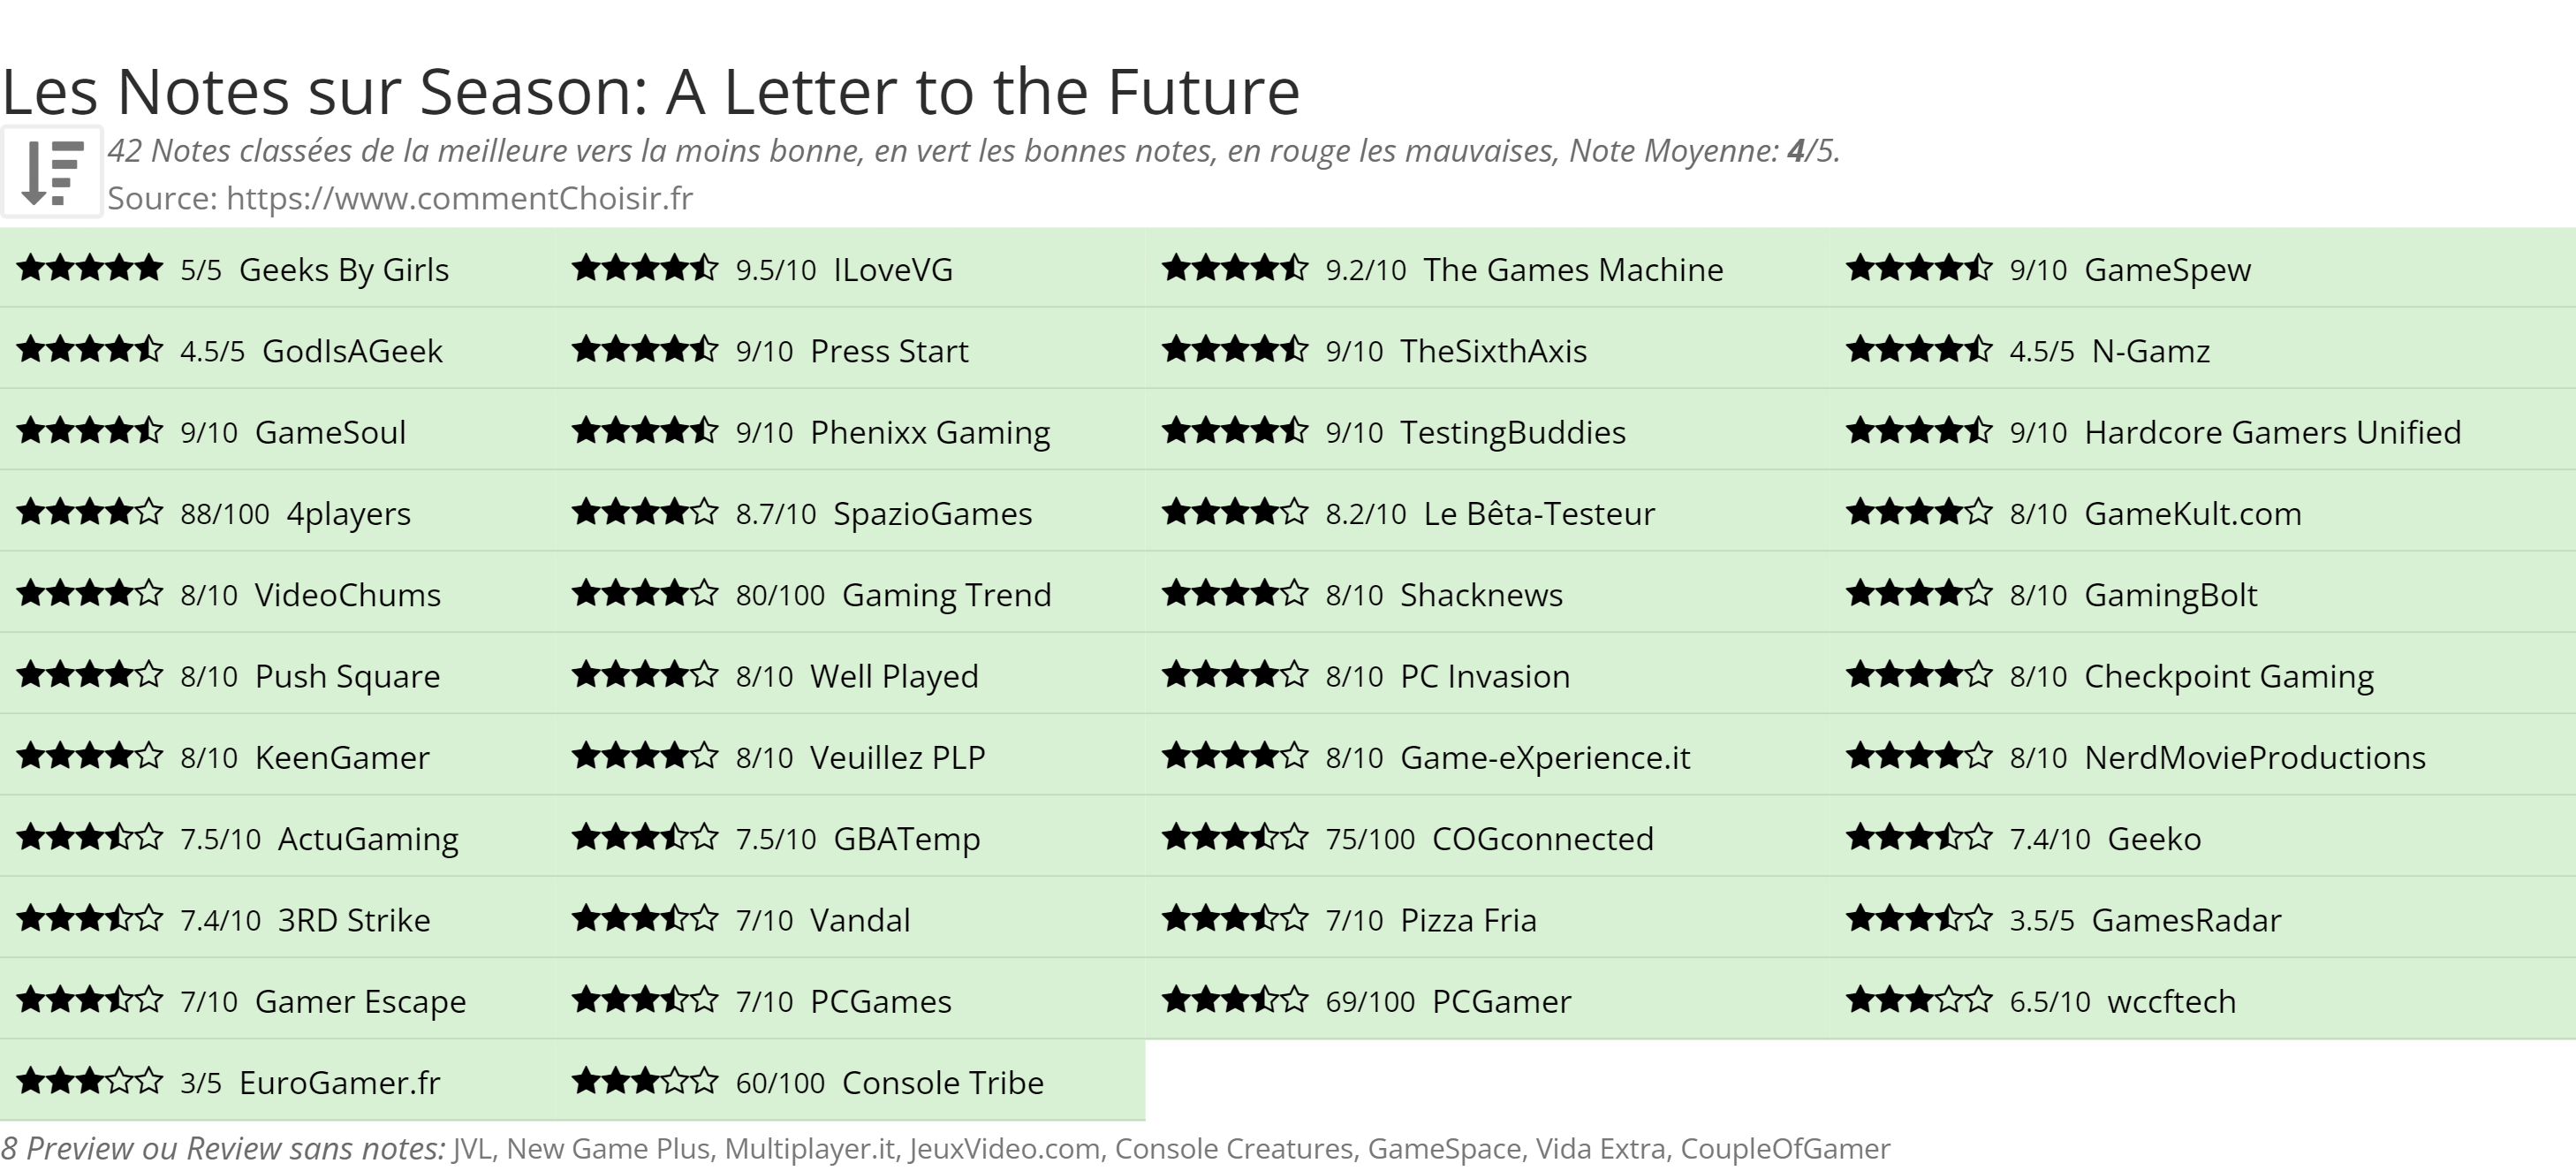 Ratings Season: A Letter to the Future